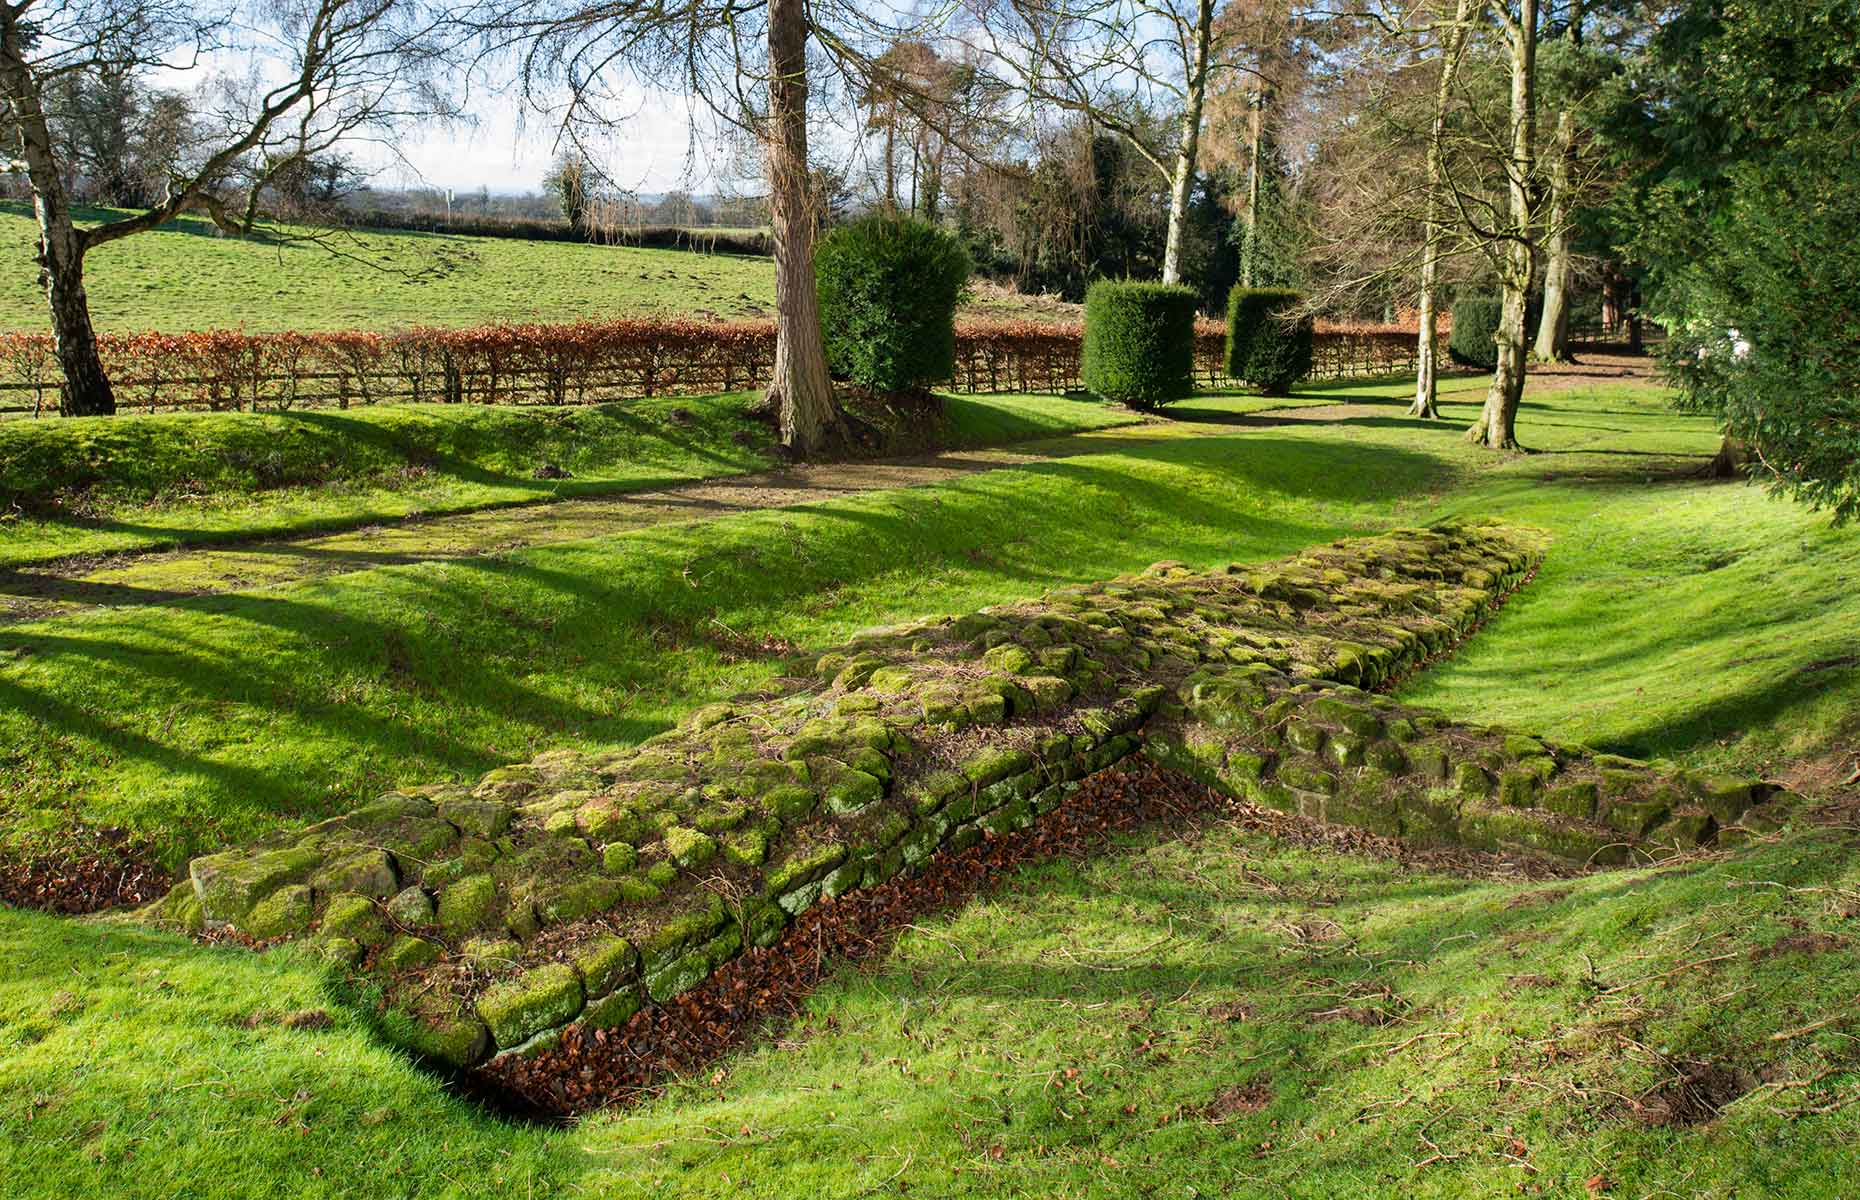 Aldborough Roman Site in Northamptonshire (Image English Heritage/Heritage Images/Getty Images)